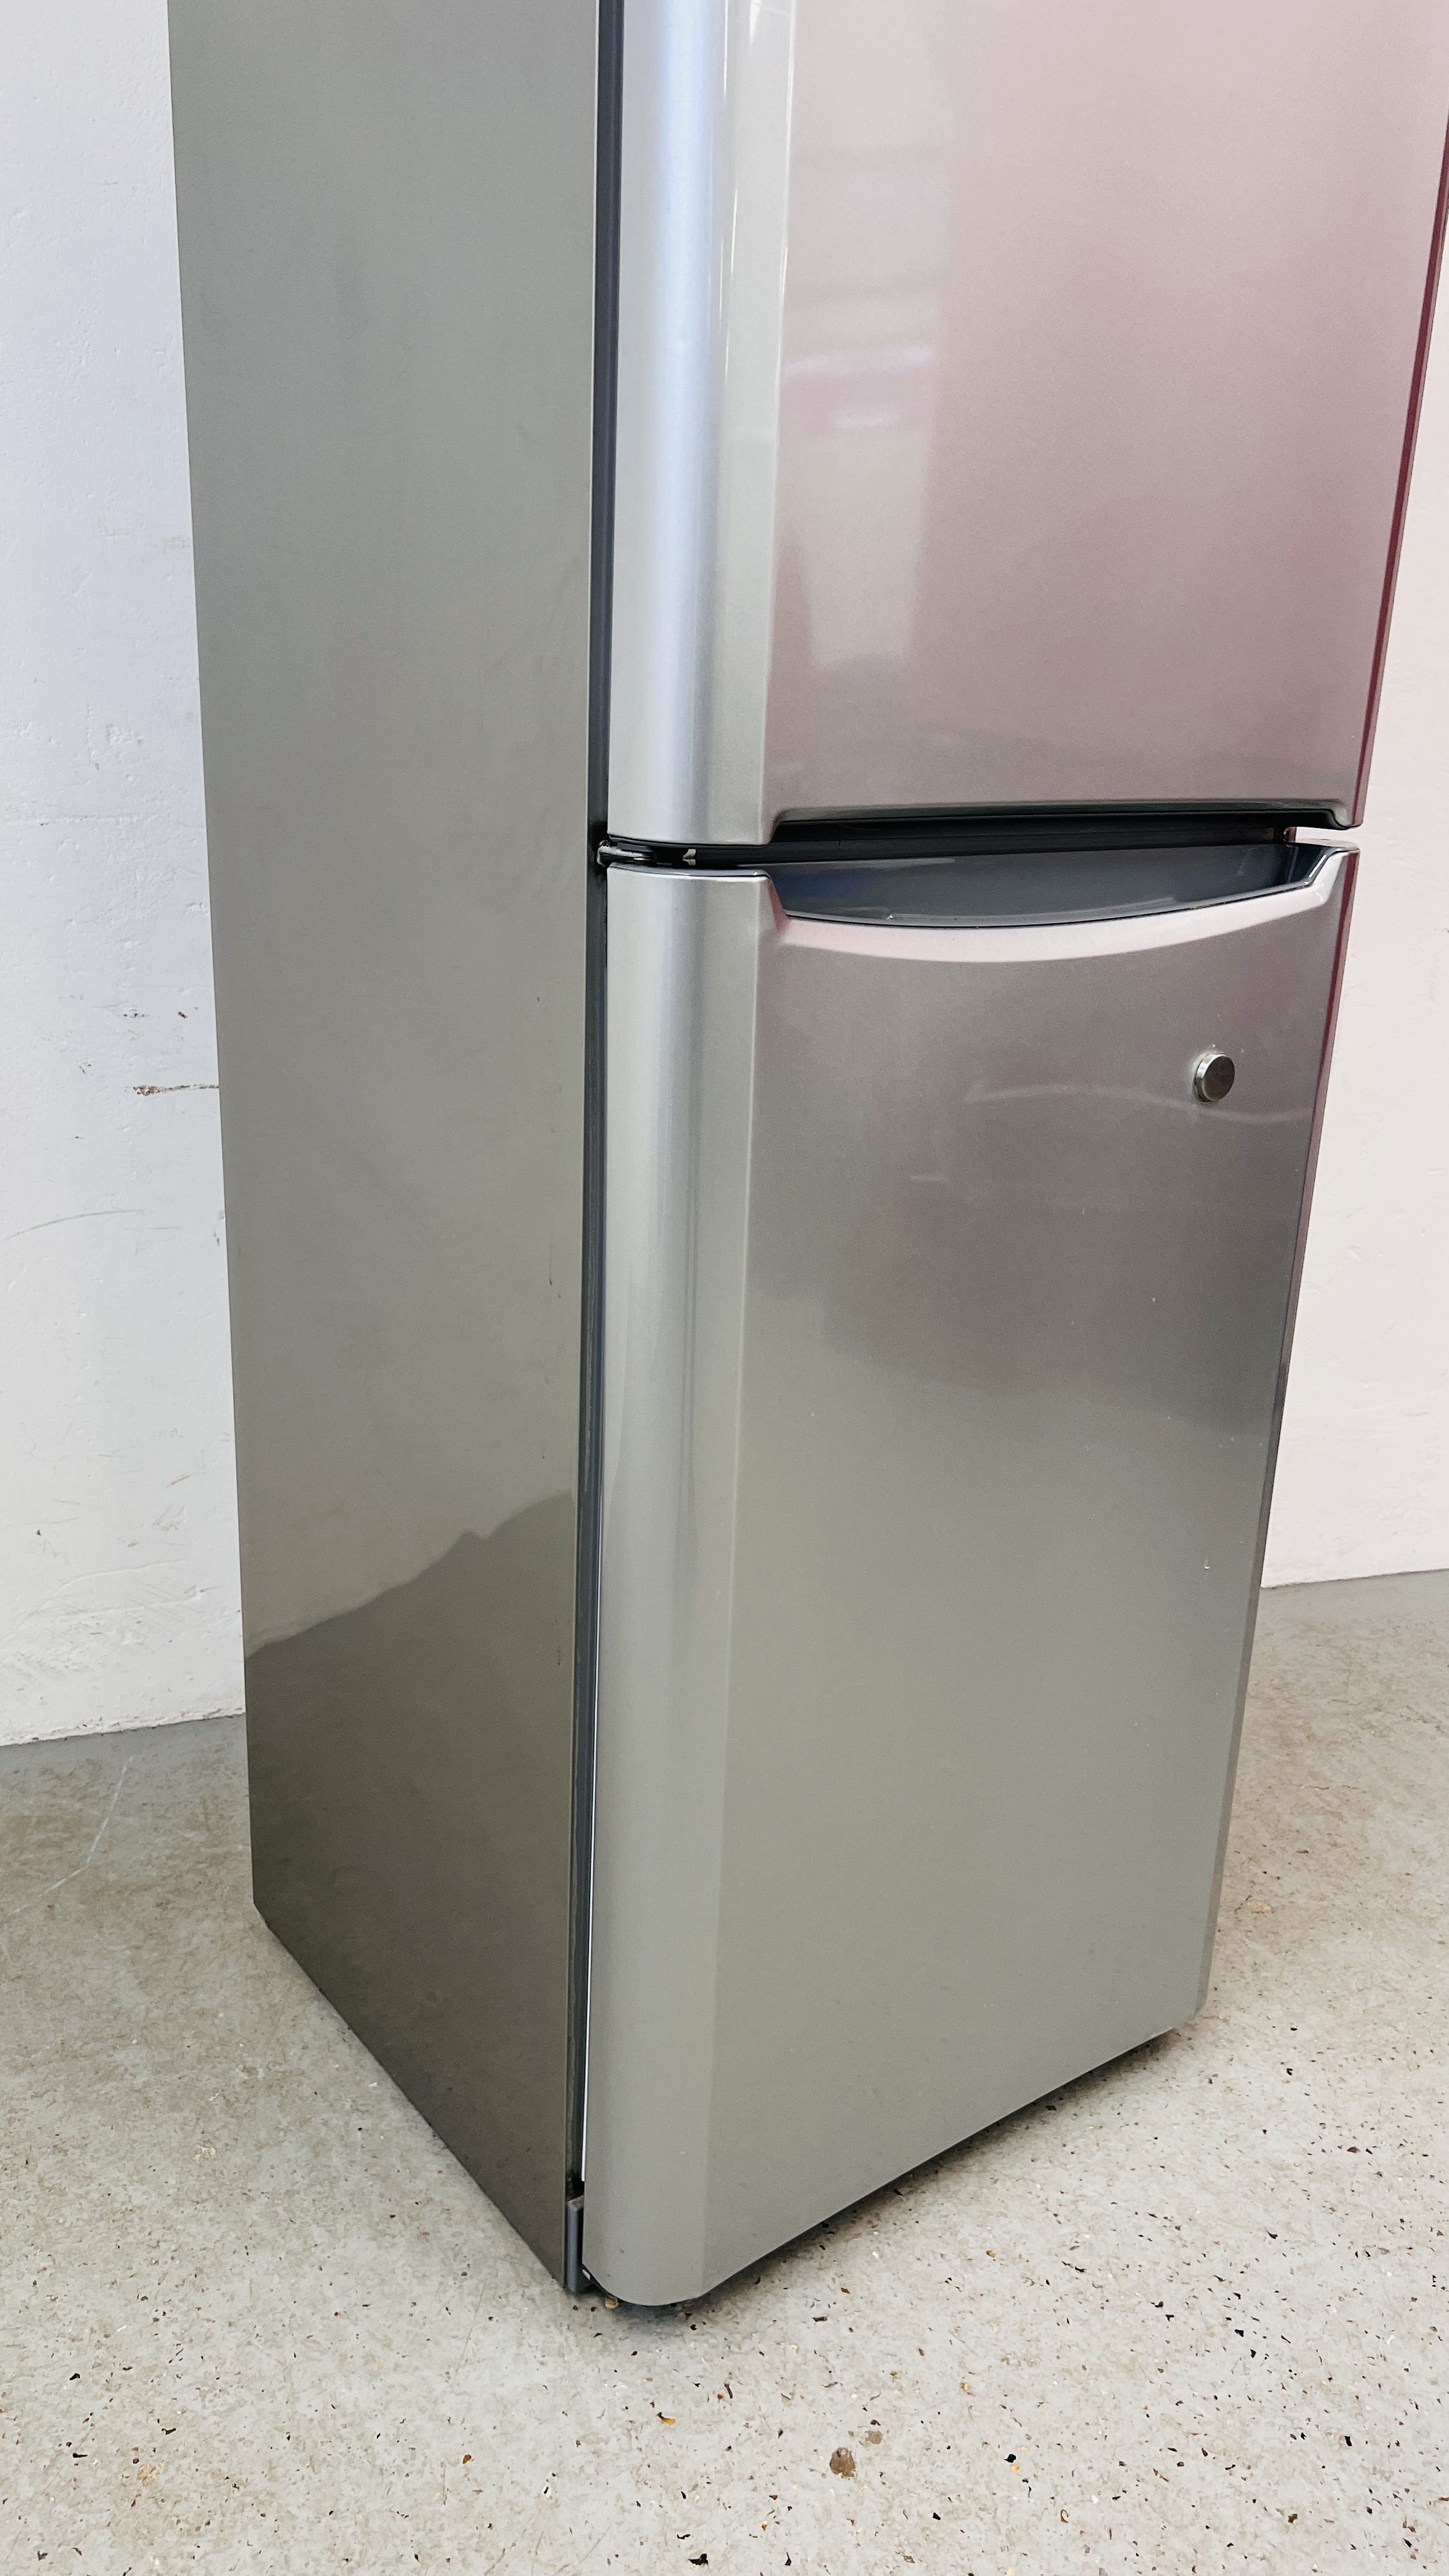 A INDISIT SILVER FINISH FRIDGE FREEZER - SOLD AS SEEN. - Image 4 of 11